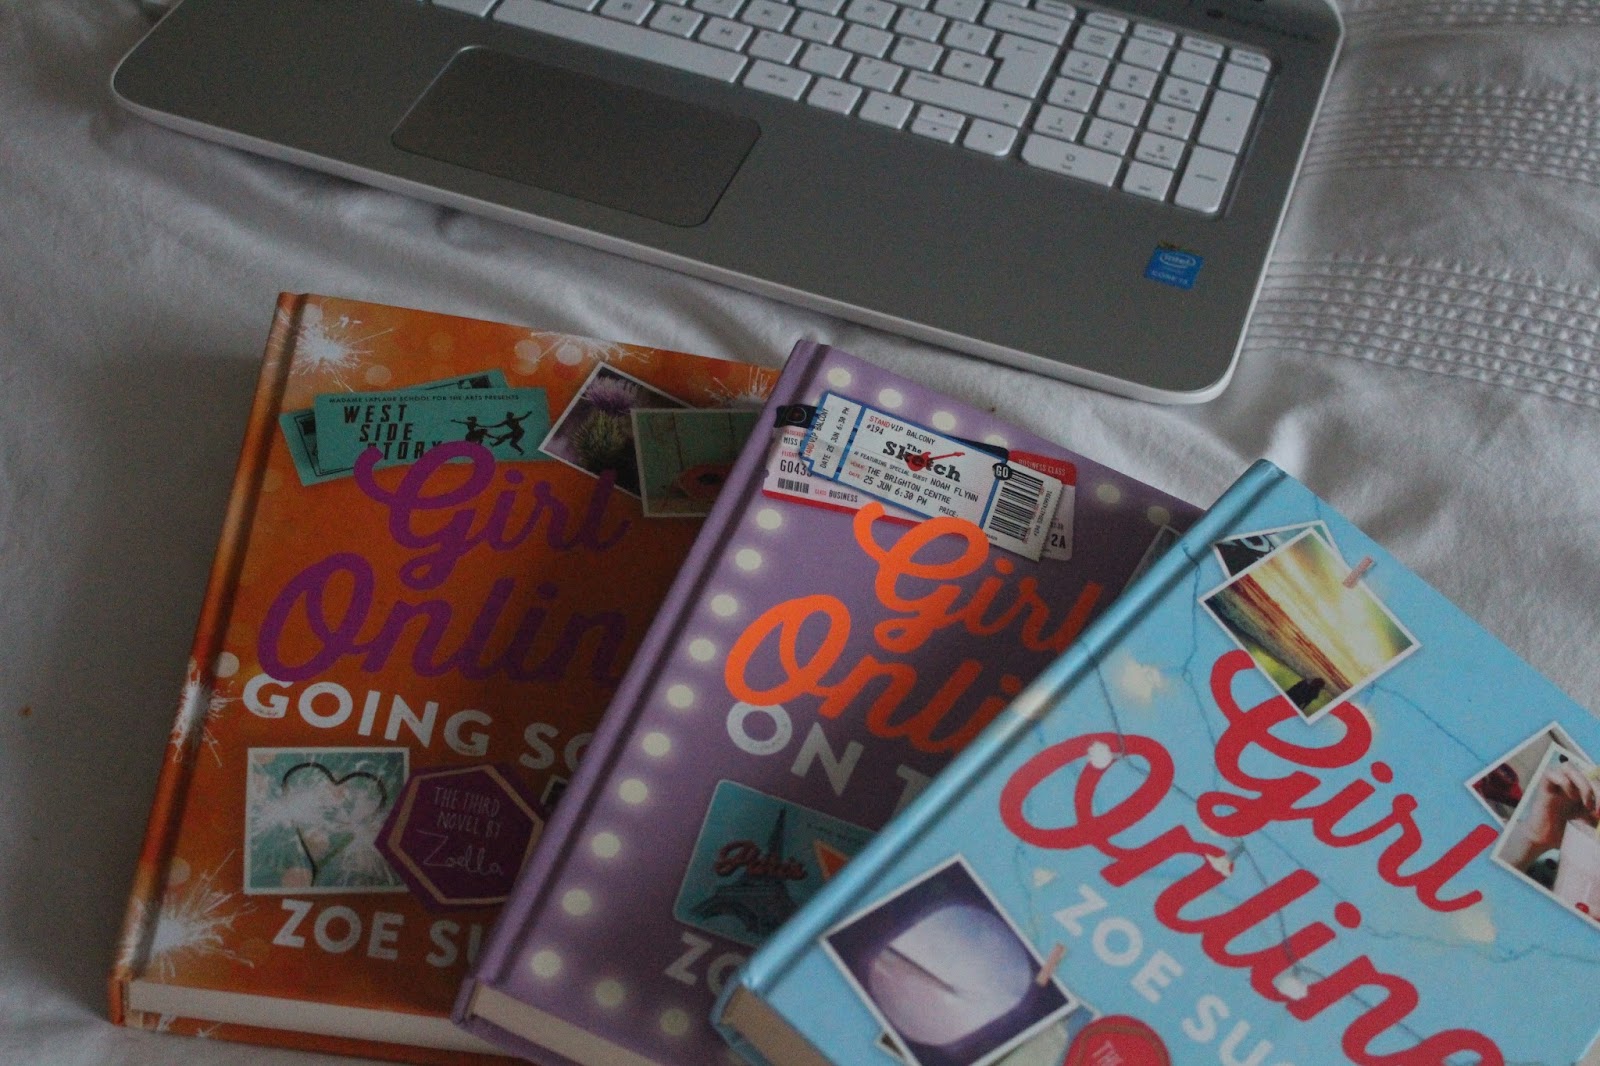 Reviewing Zoella's Girl Online Series: 